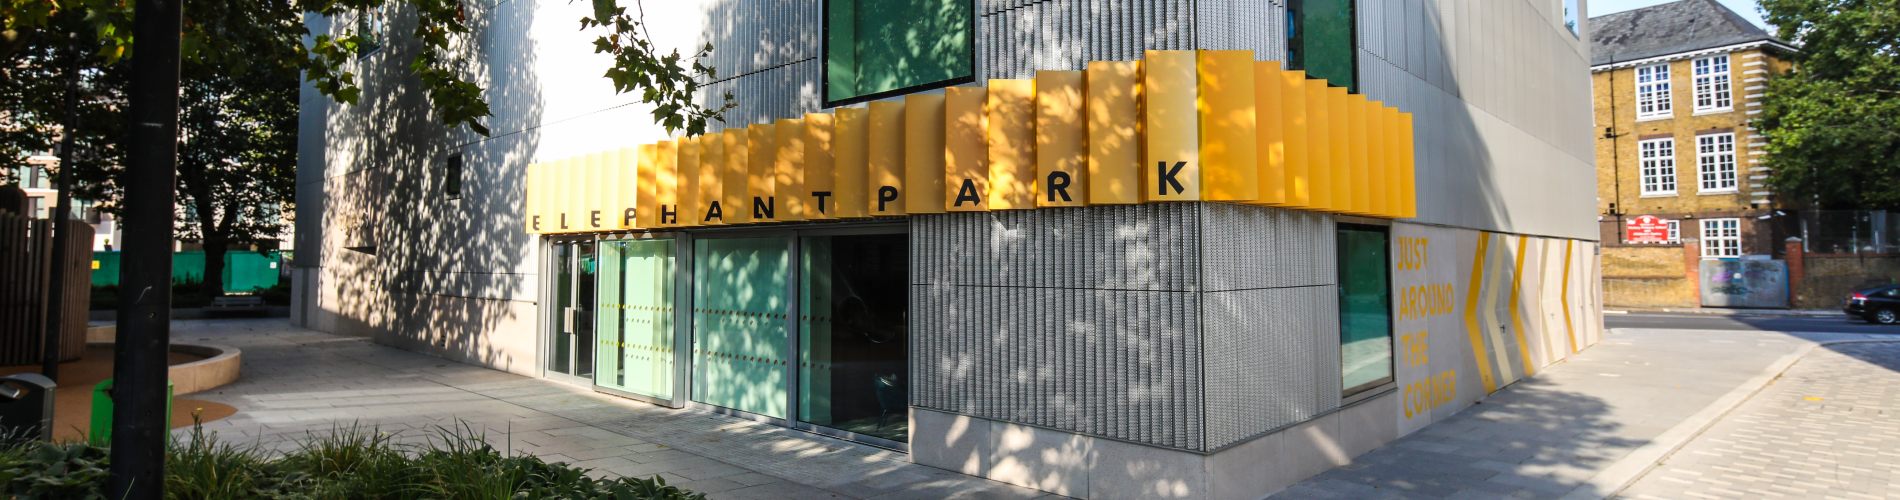 A grey building with a yellow Elephant Park sign above the doorway